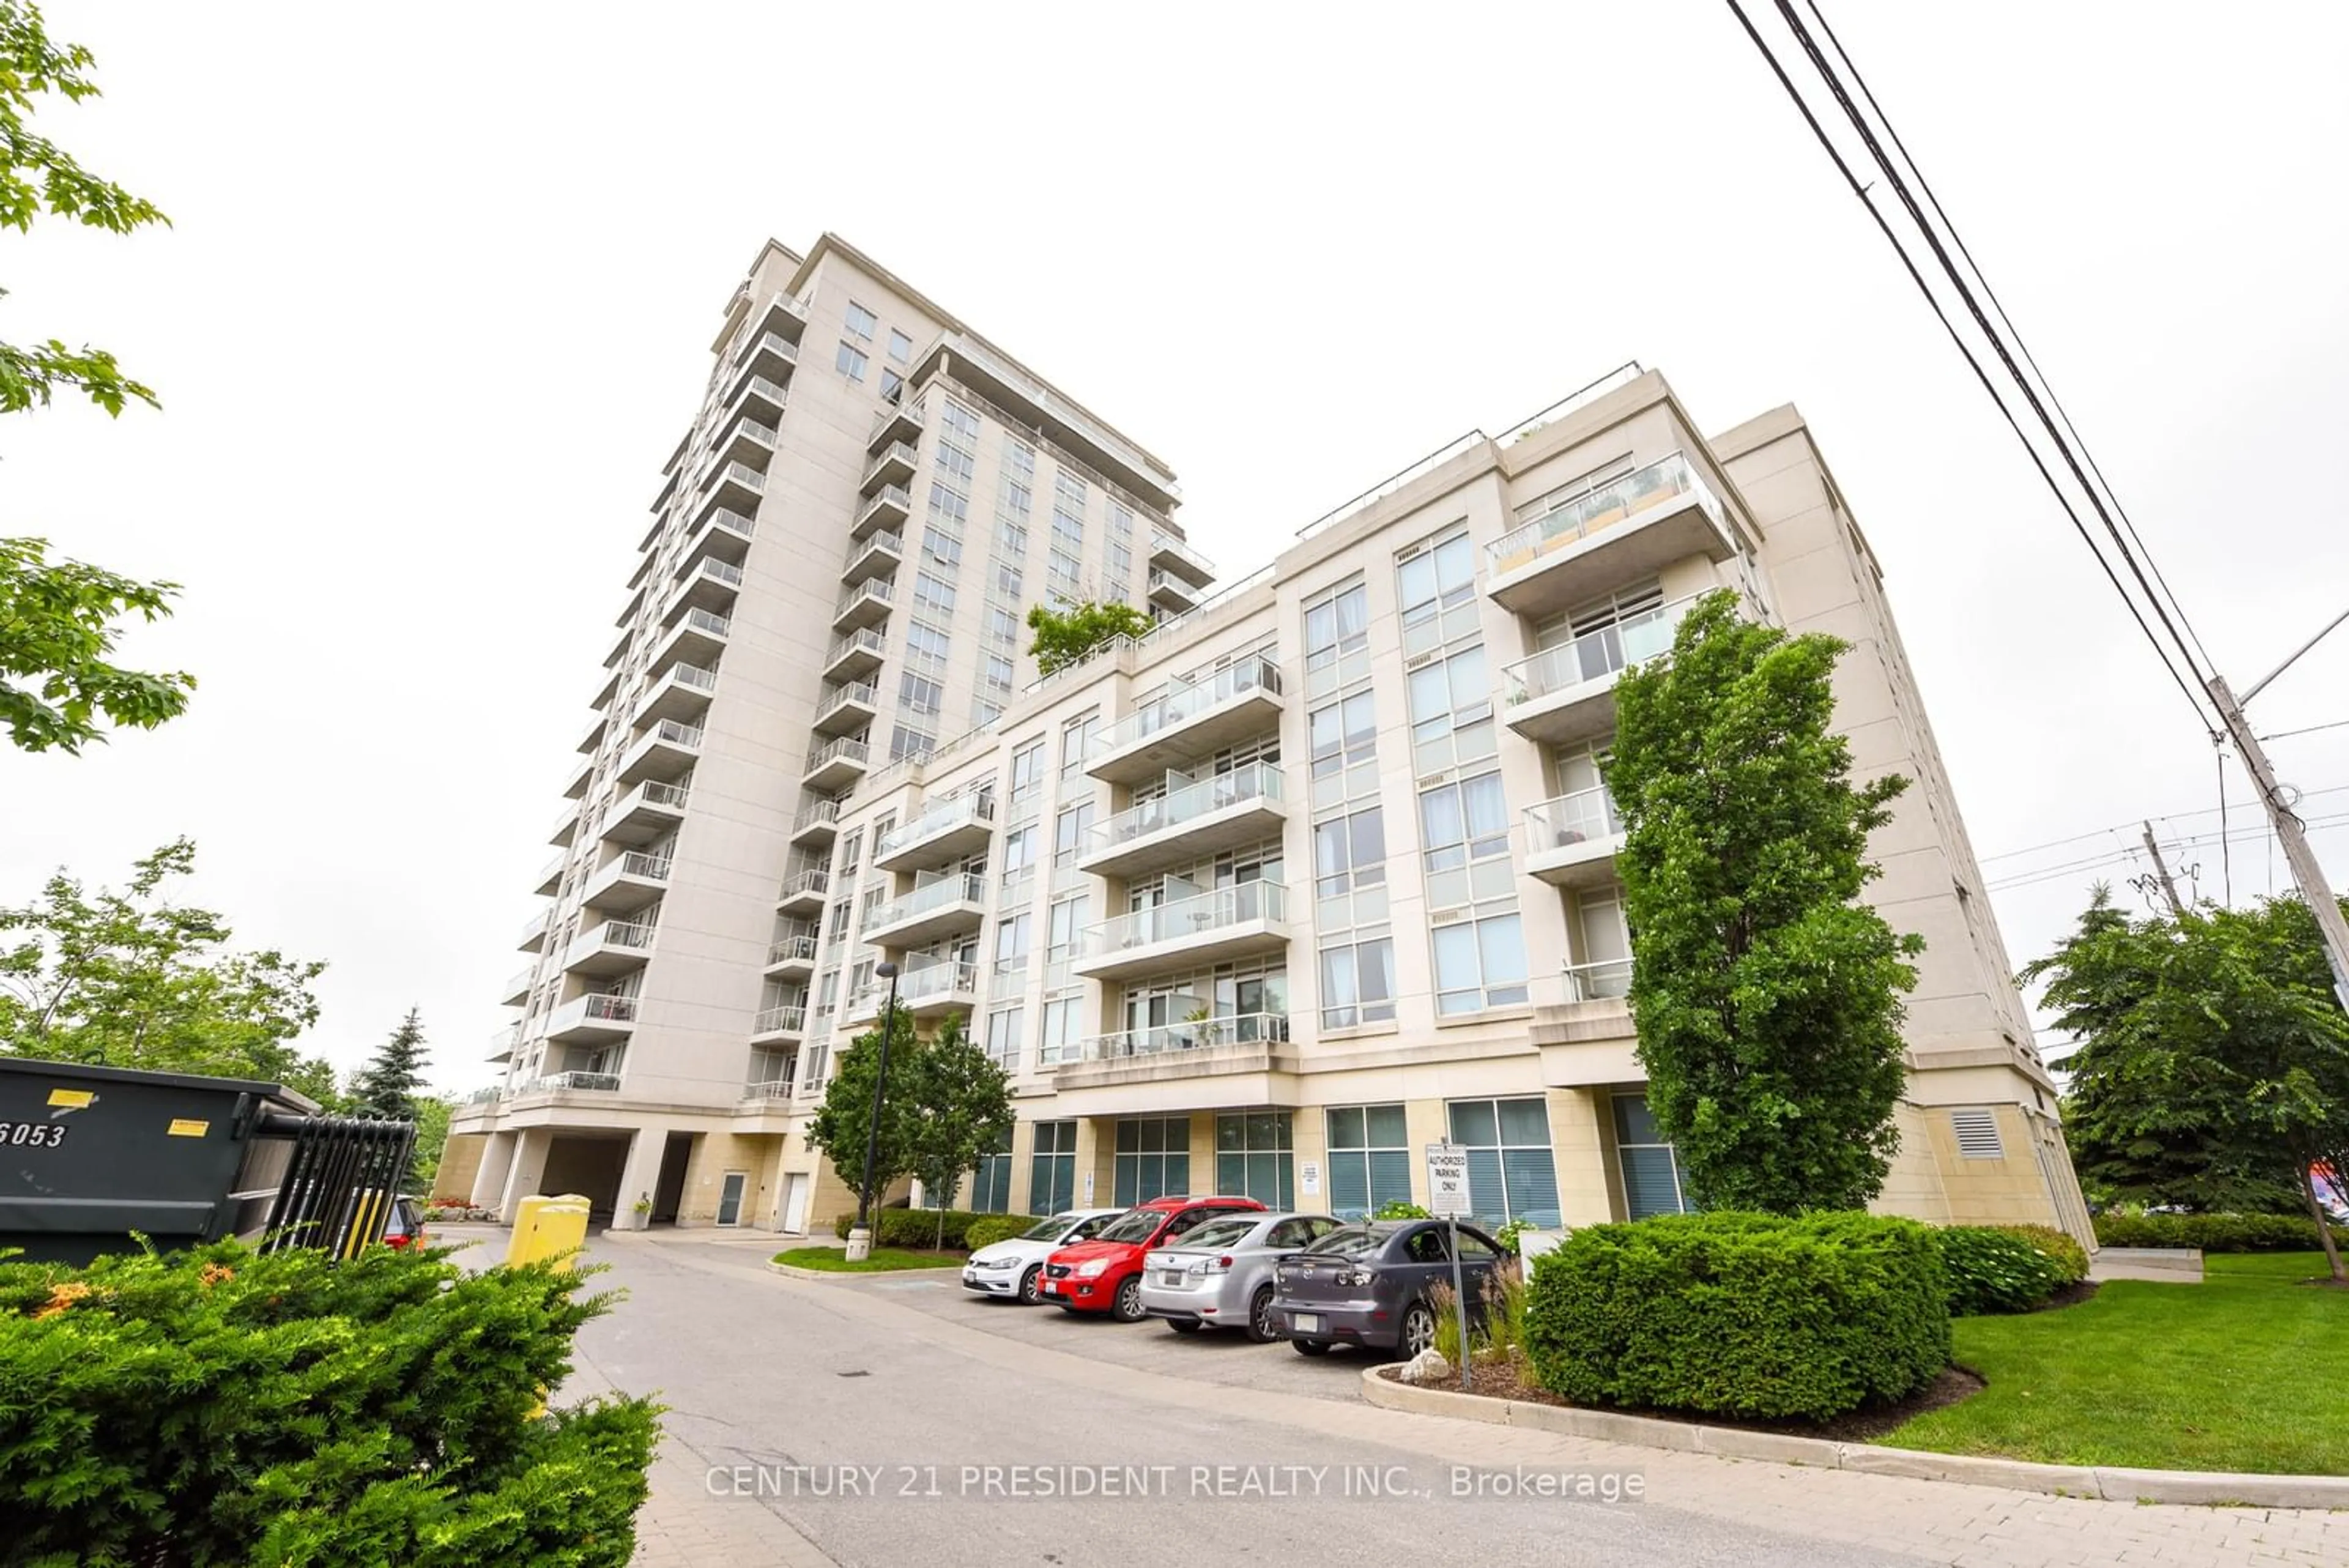 A pic from exterior of the house or condo for 3865 Lake Shore Blvd #1101, Toronto Ontario M8W 1R4